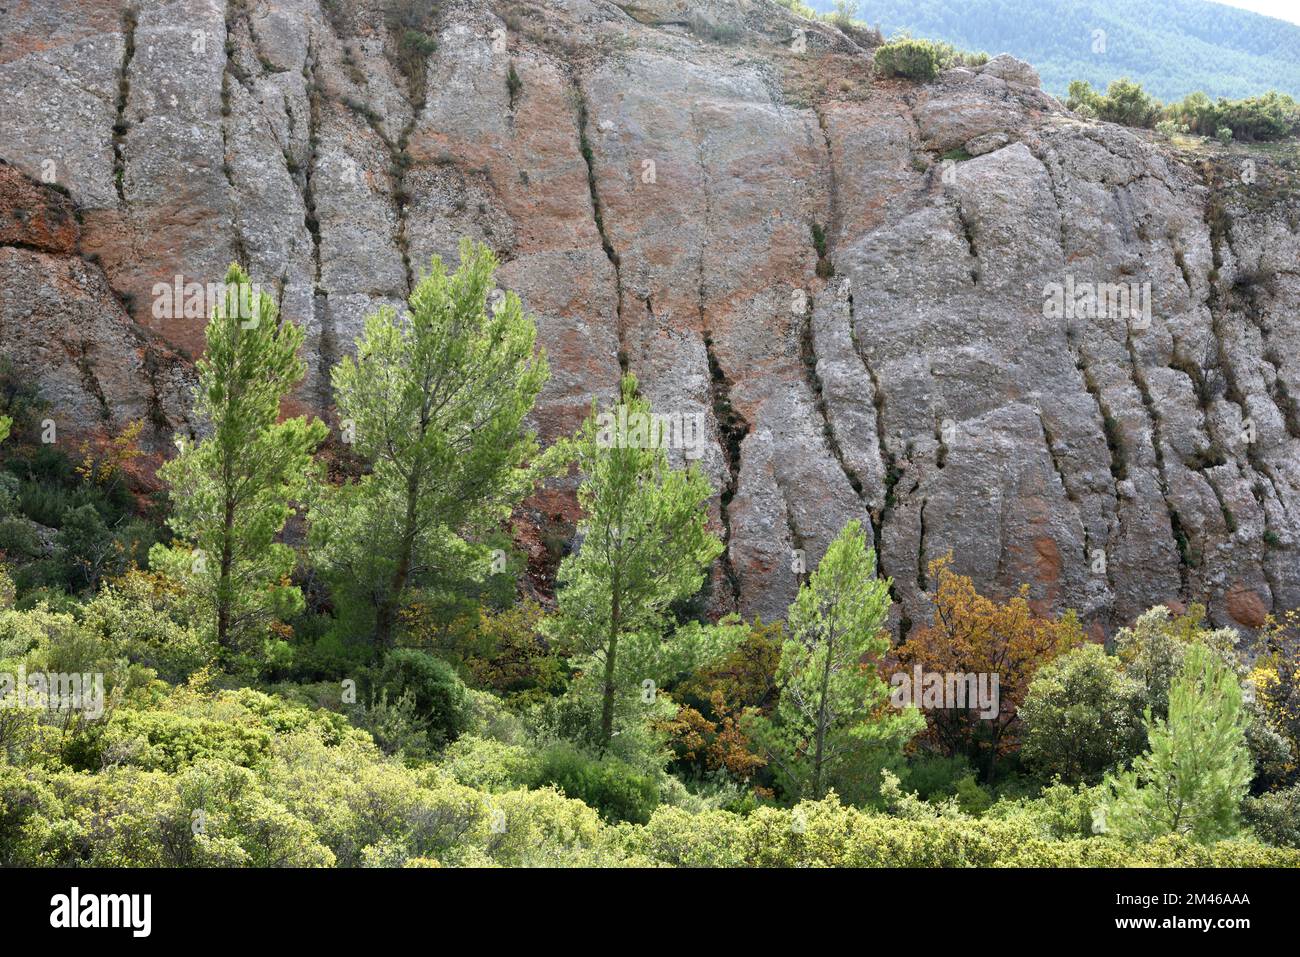 Outcrops of Ochre Clay and Calcareous Composite Rocks to south of the Montagne Sainte Victoire Nature Reserve Provence France Stock Photo